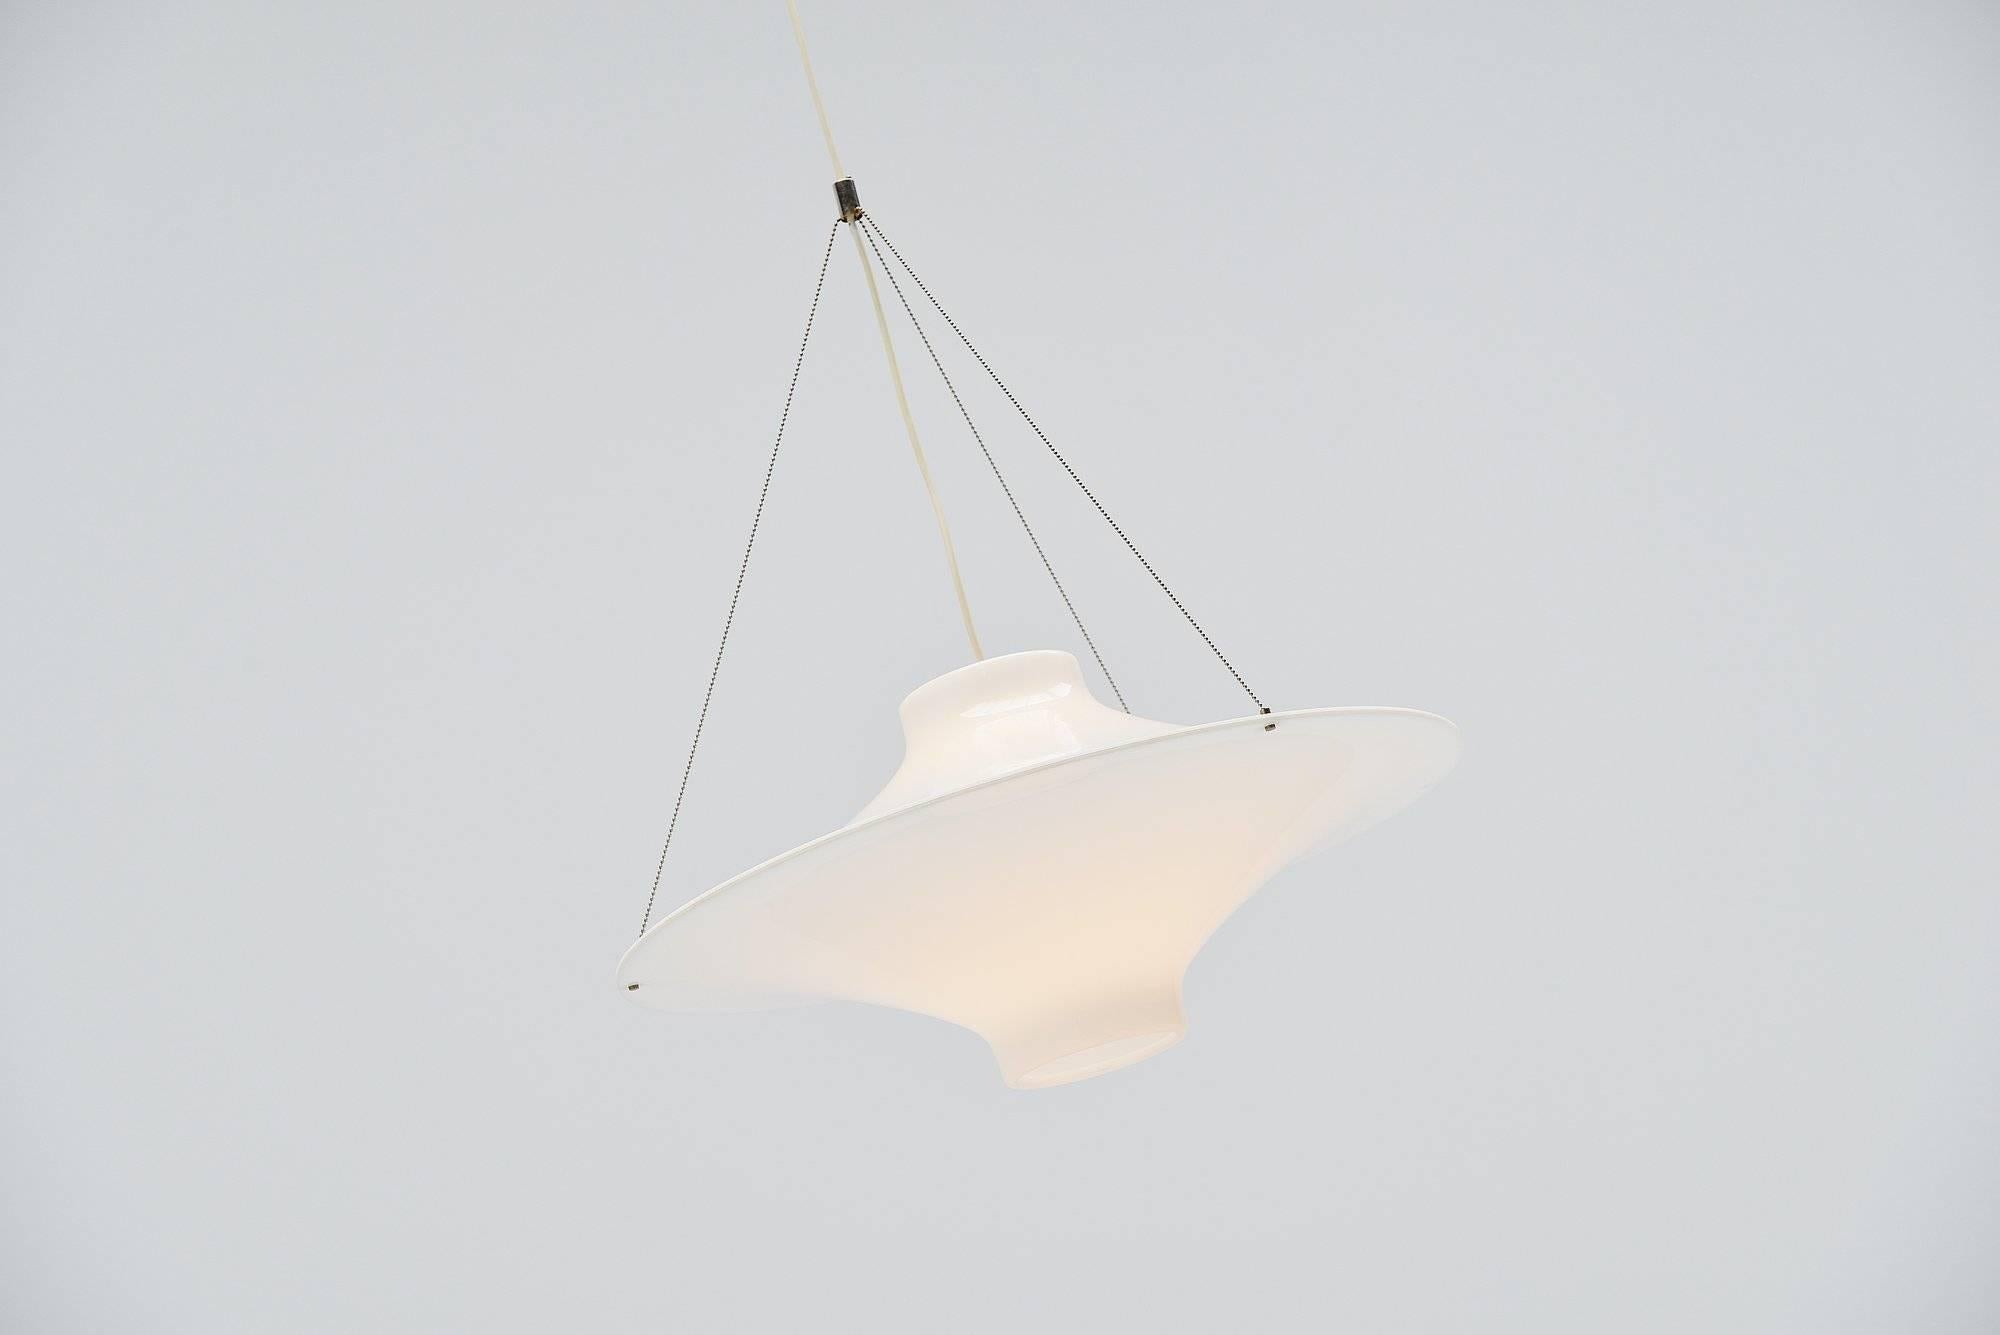 Very nice skyflyer/Lokki pendant lamp designed by Yki Nummi and manufactured by Sanka, Finland 1960. This is an old original edition, not a re-edition. The lamp is made of white perspex and has a metal wire. Very nice timeless pendant lamp, large